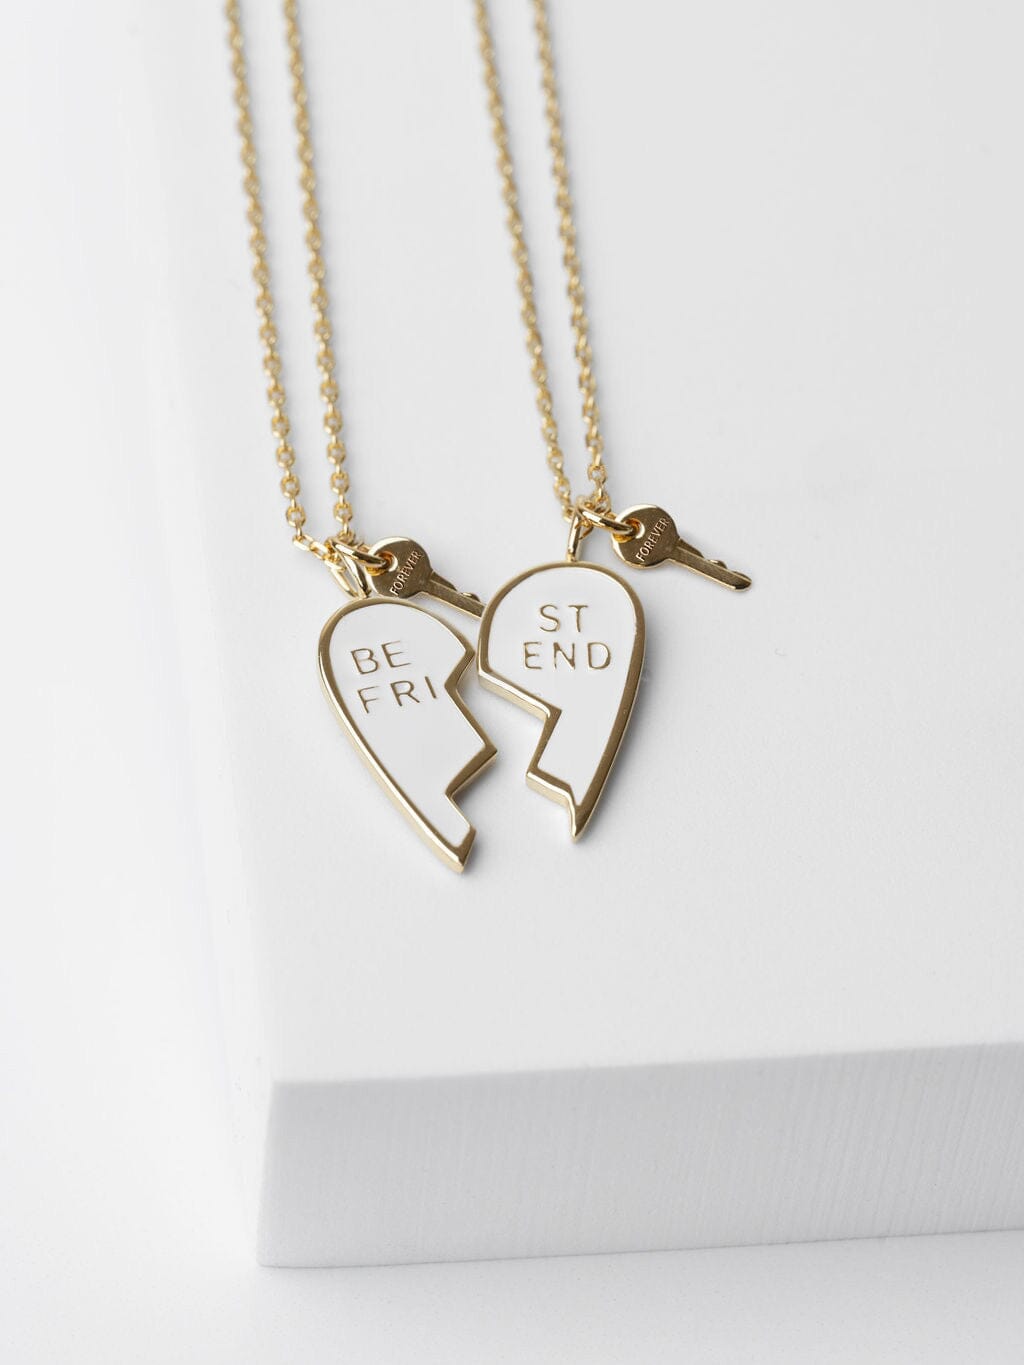 Engraved Real Lock and Key Heart Necklaces Set for 2